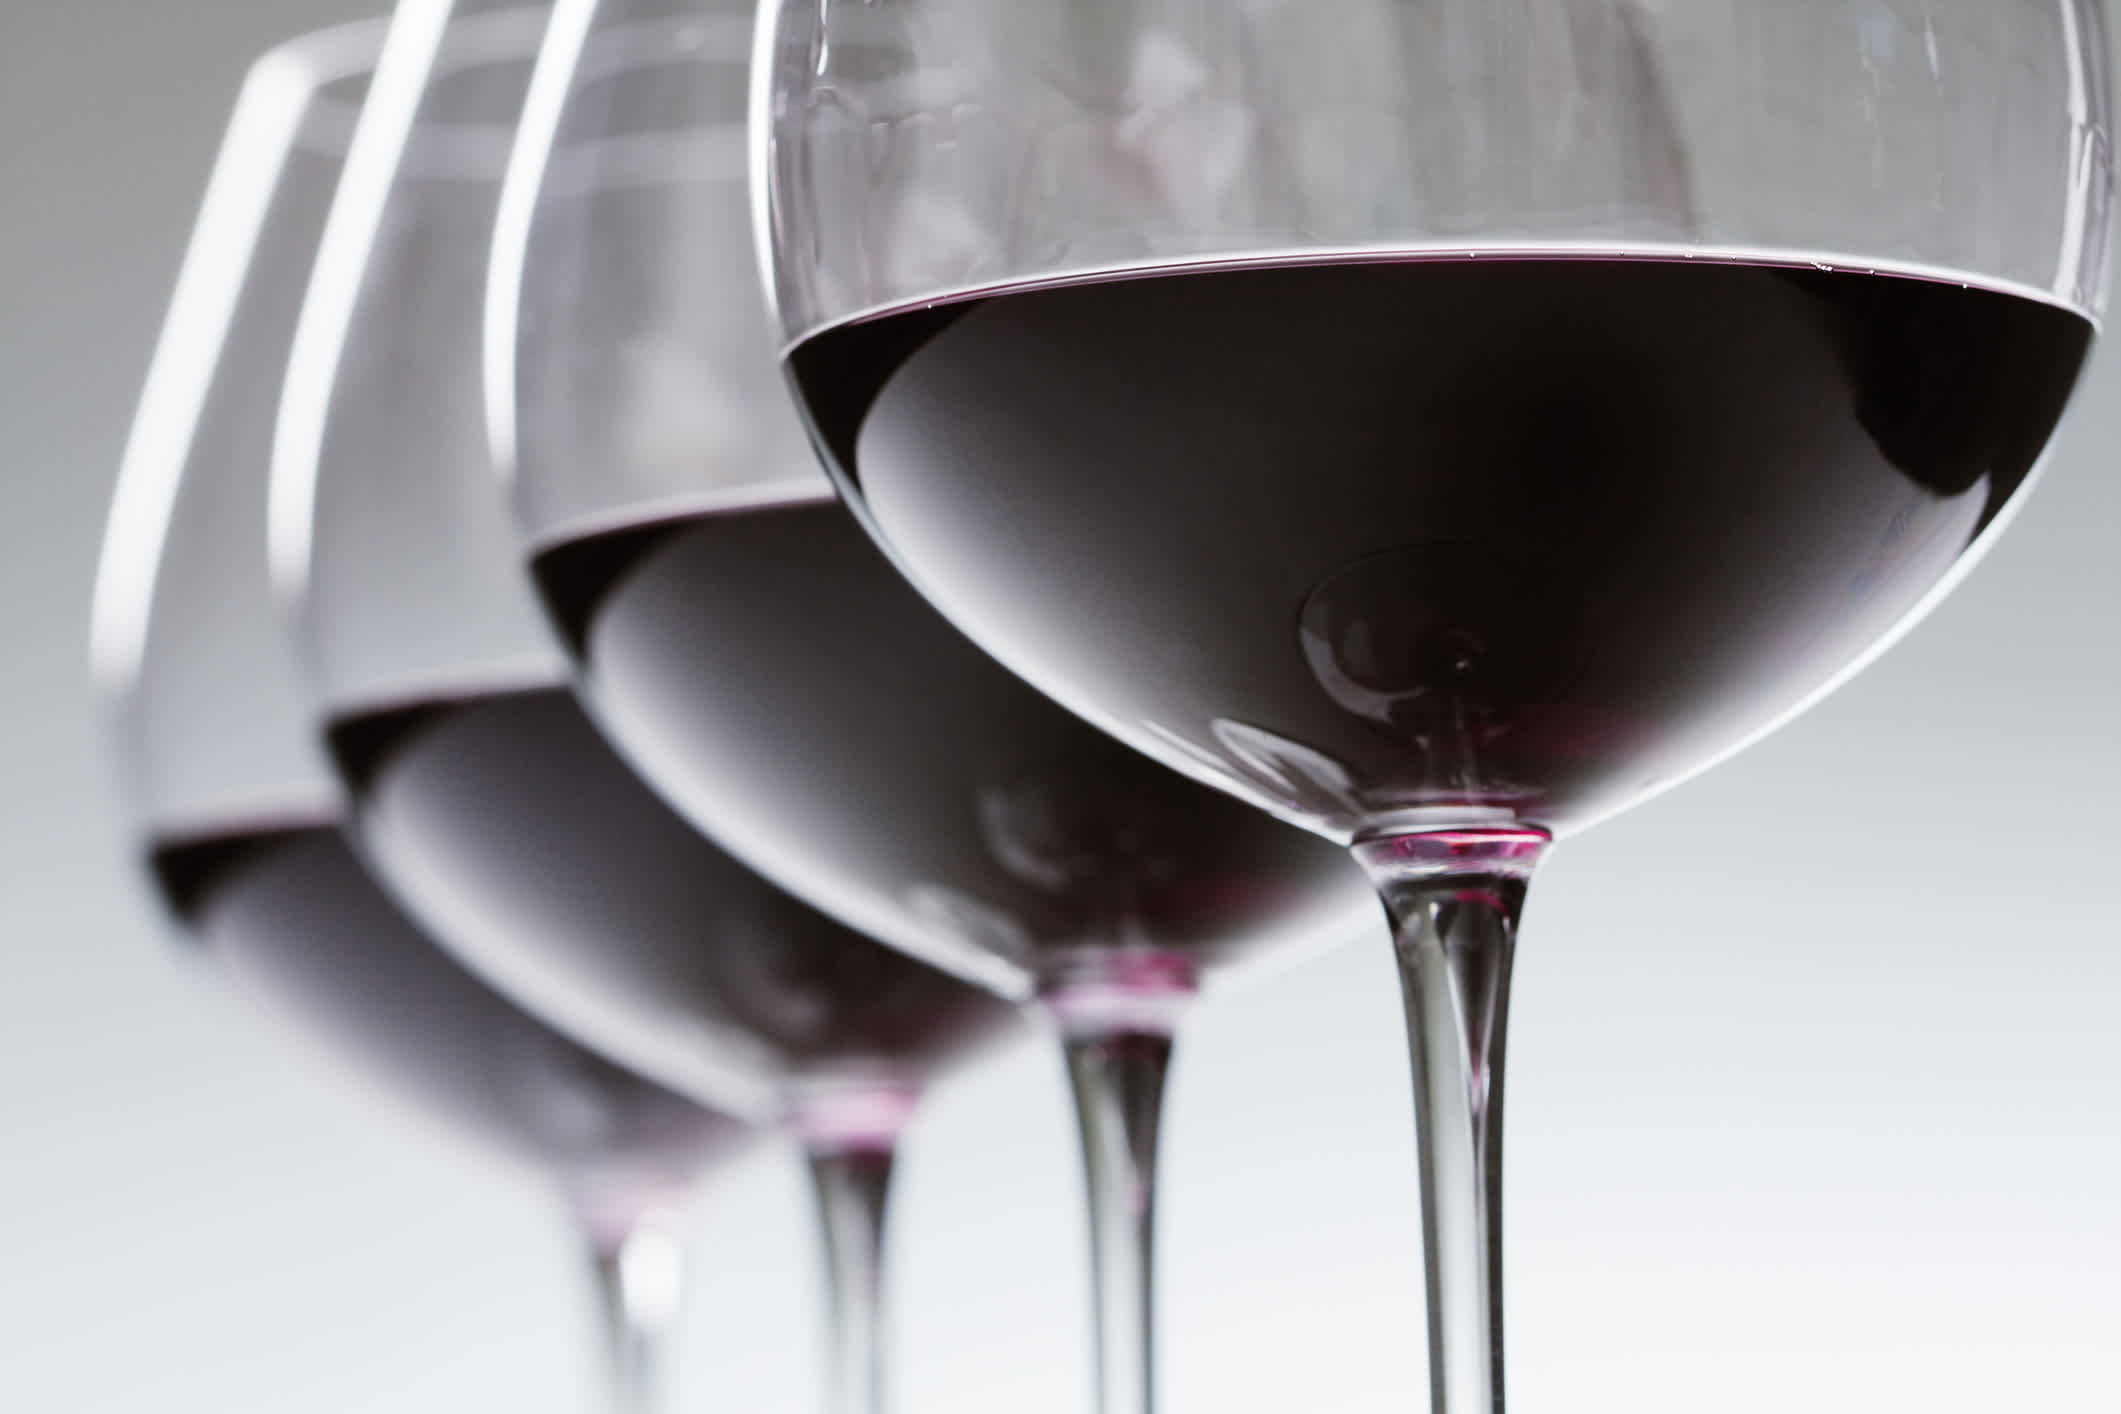 Red Wine Types Chart: Light, Heavy or Full Bodied Spectrum